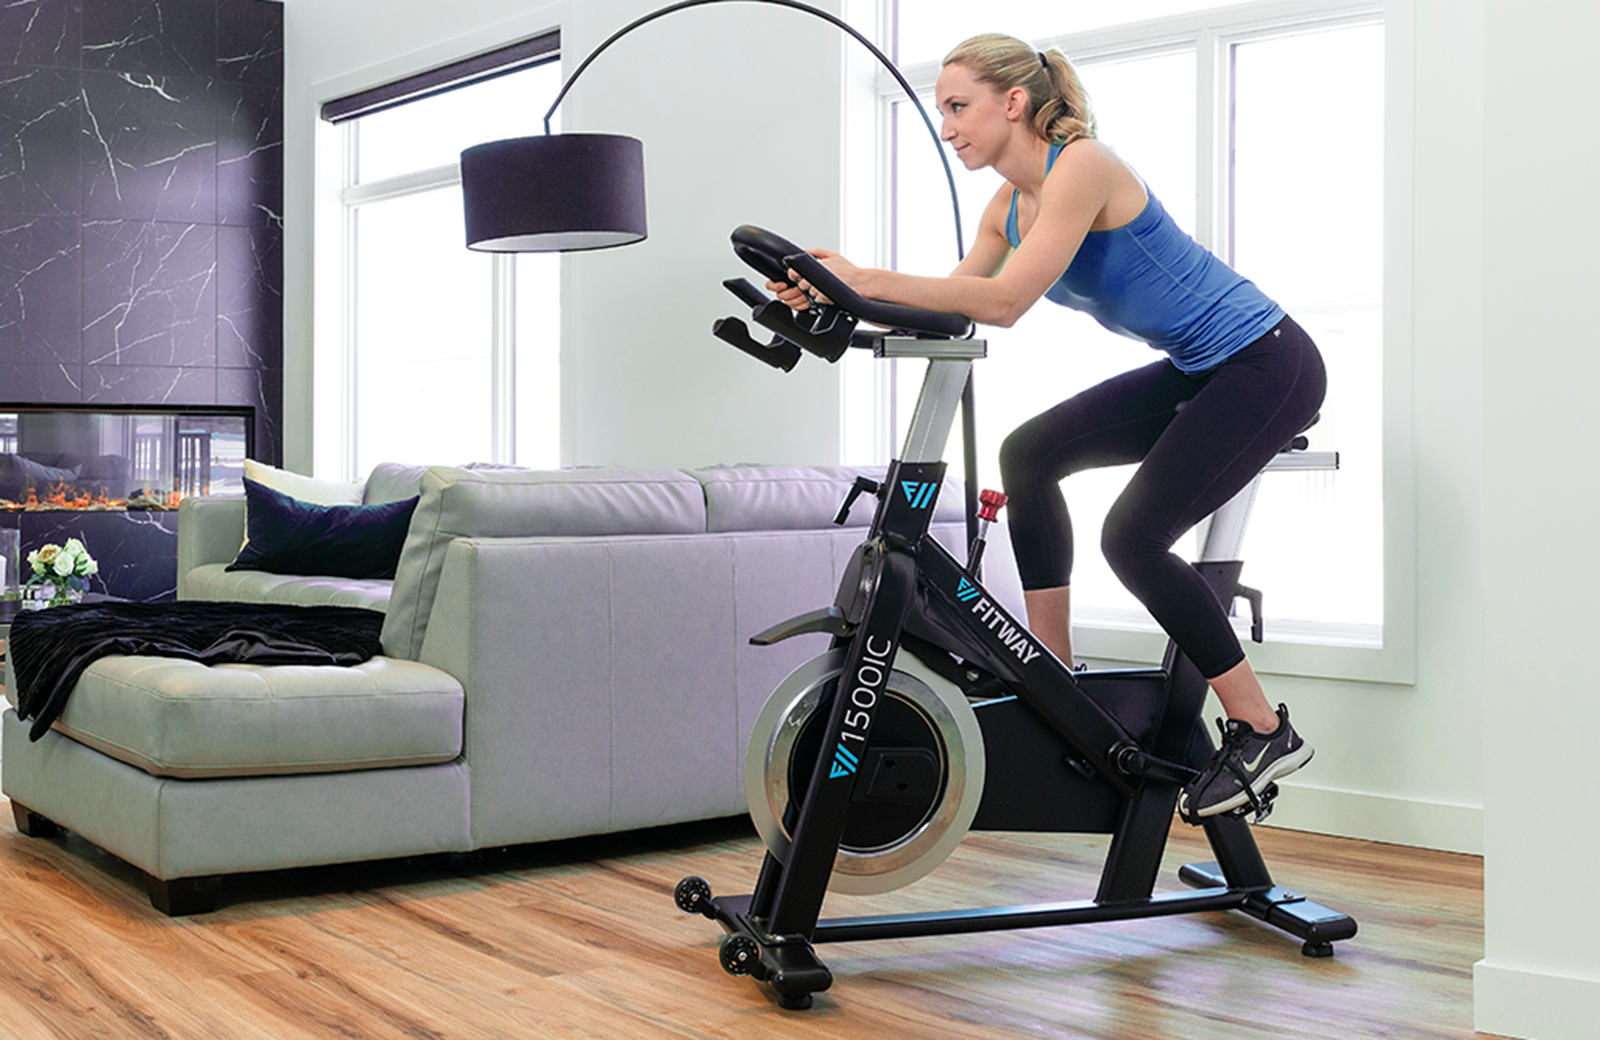 What Makes a Spin Bike Different than a Regular Bike?